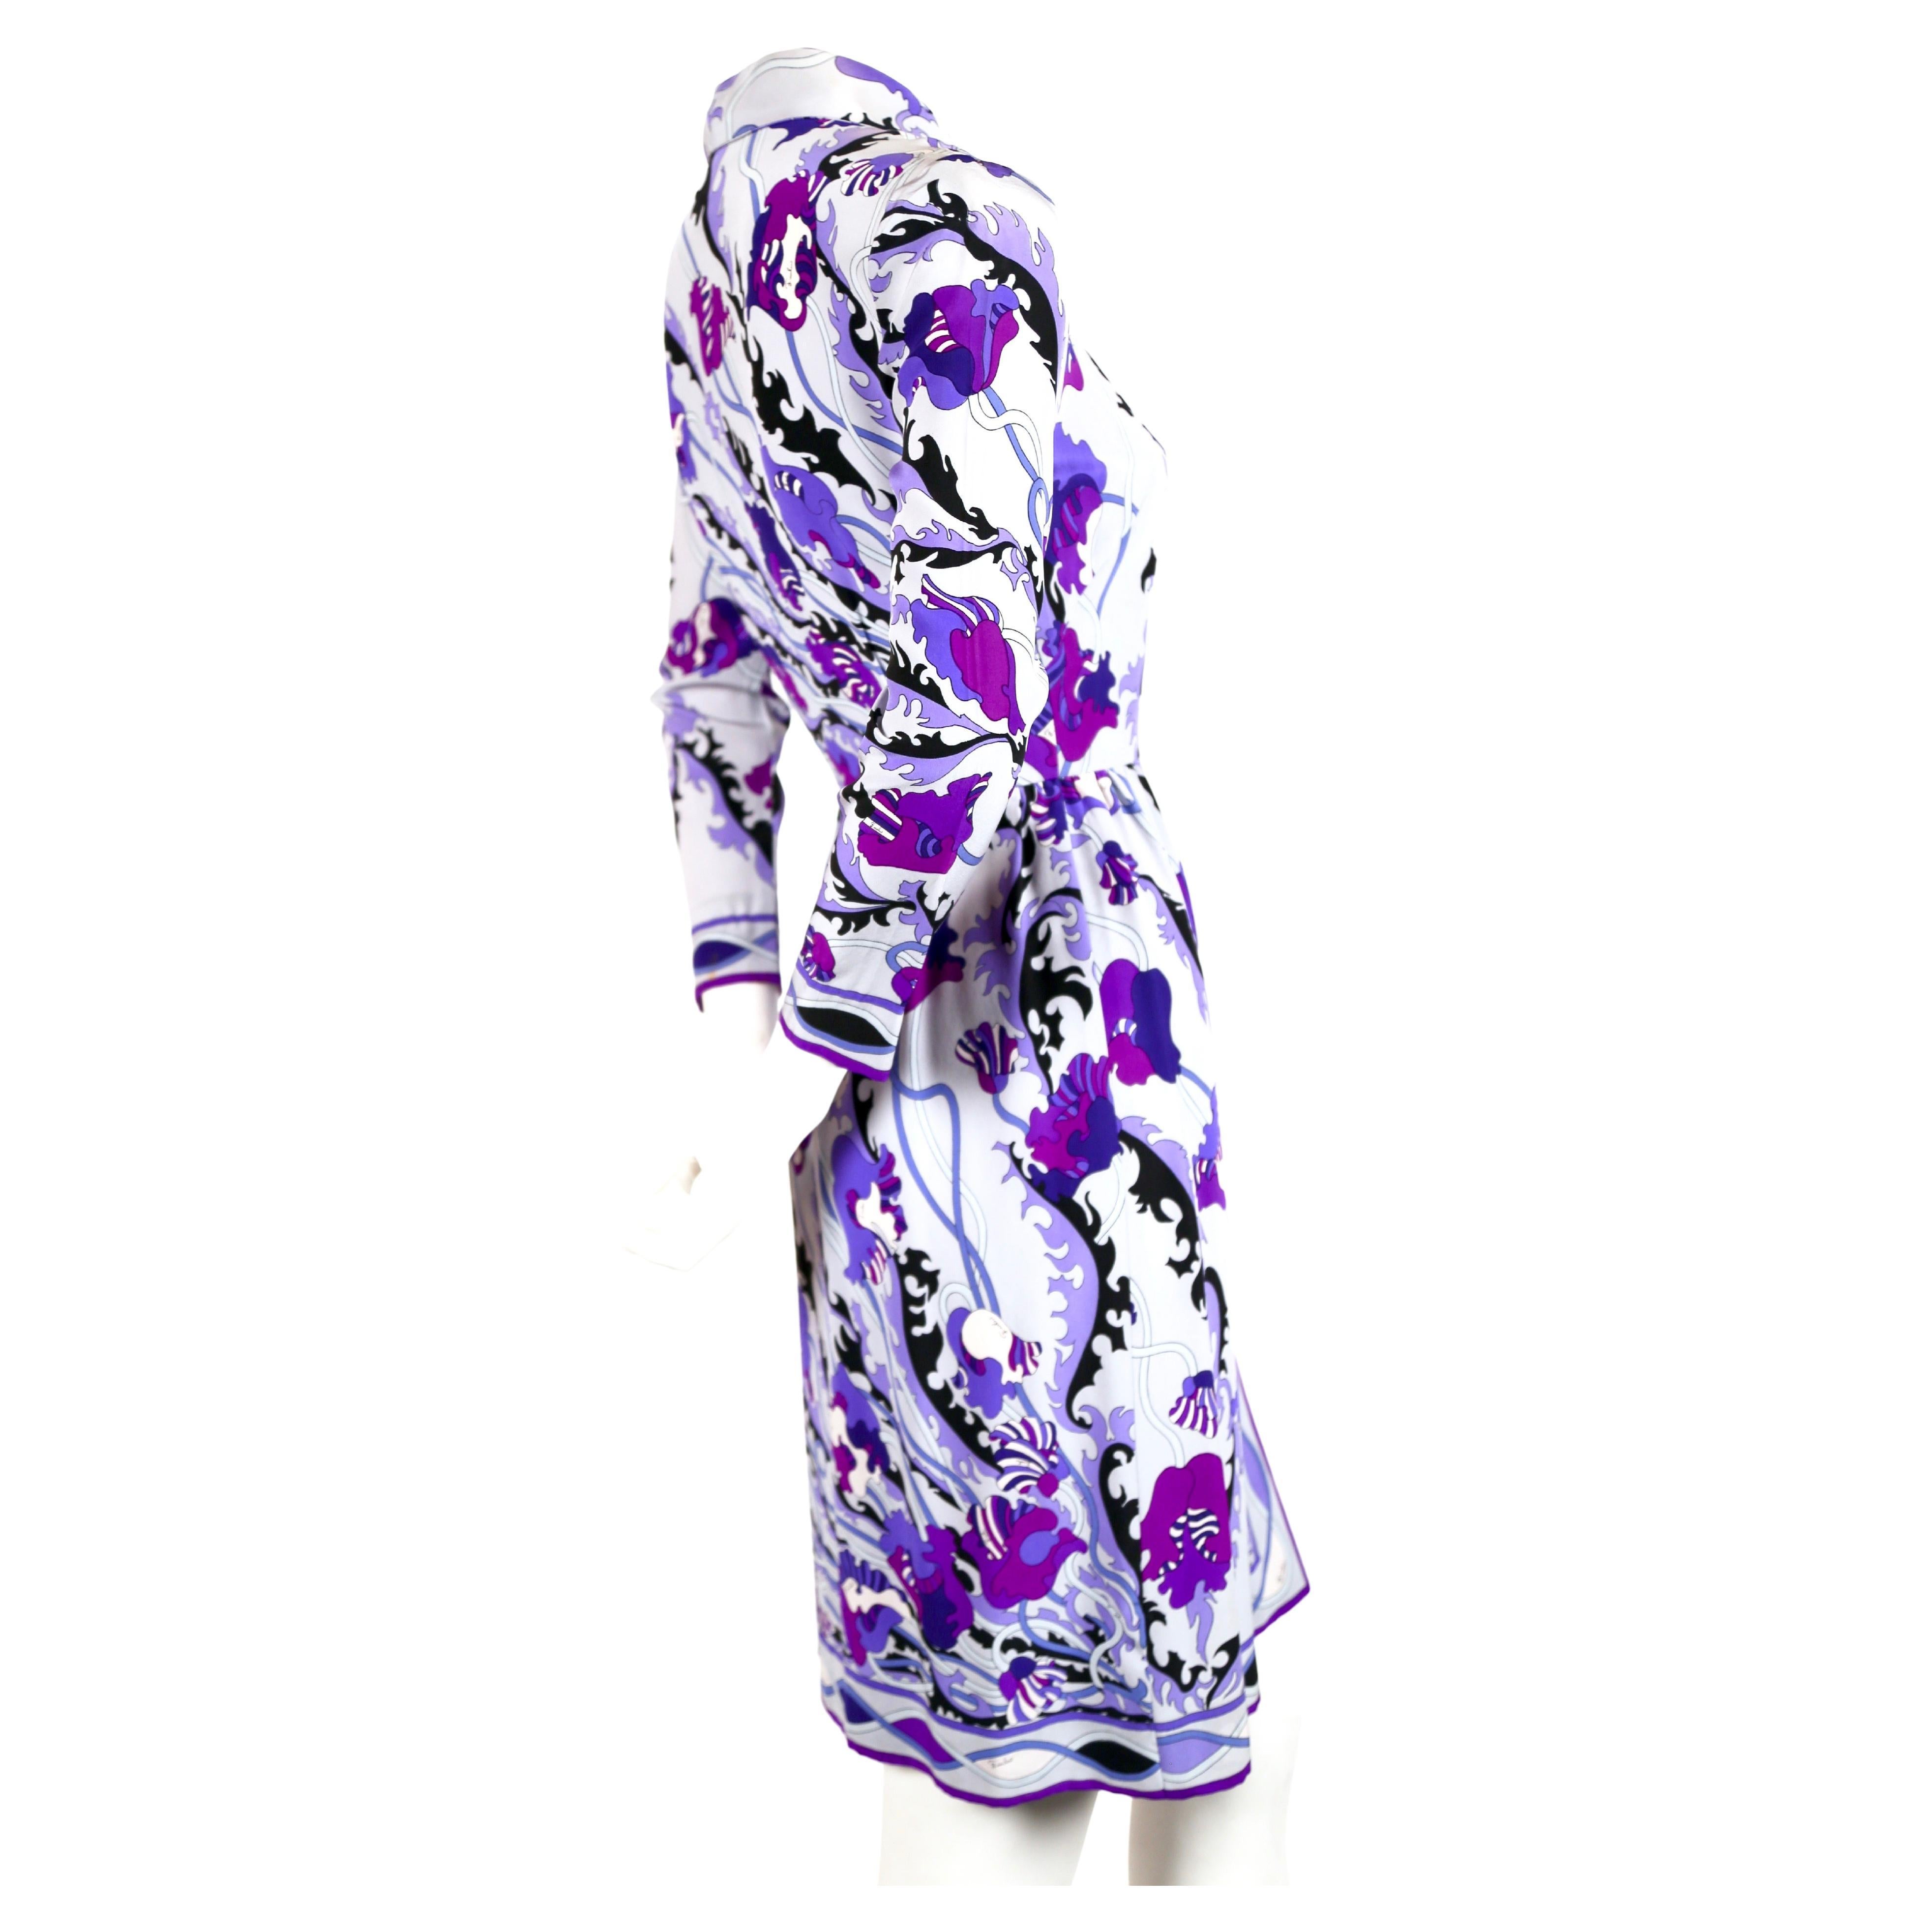 Vibrant, floral printed silk dress designed by Emilio Pucci dating to the 1960's. Beautiful color scheme of blues and purples with black accents. Snap closure at front. Fits a US 2. Bust measures approximately 34